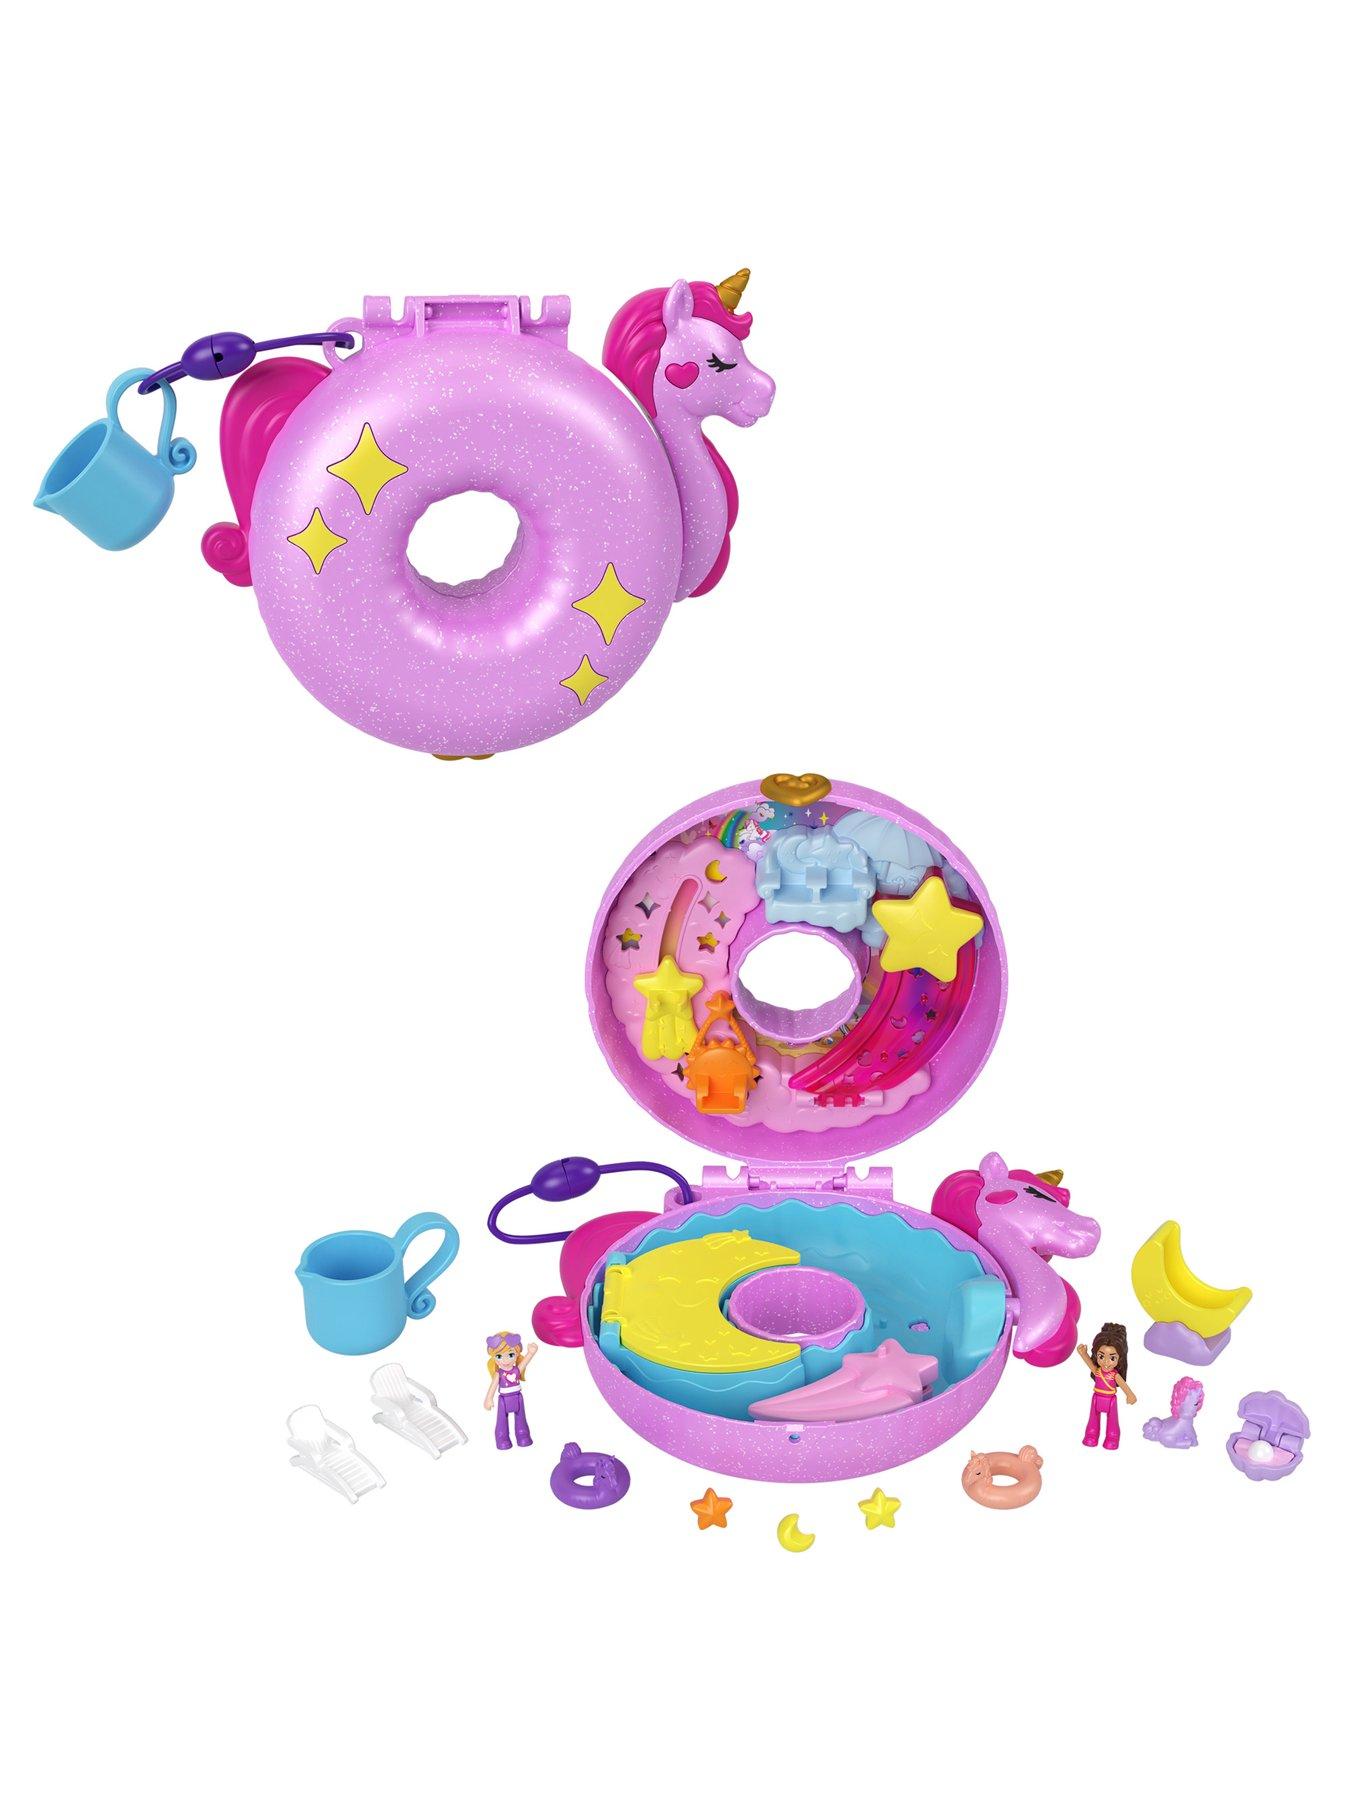 Polly Pocket Unicorn Tea Party Compact Playset with 2 Micro Dolls &  Accessories, Travel Toys